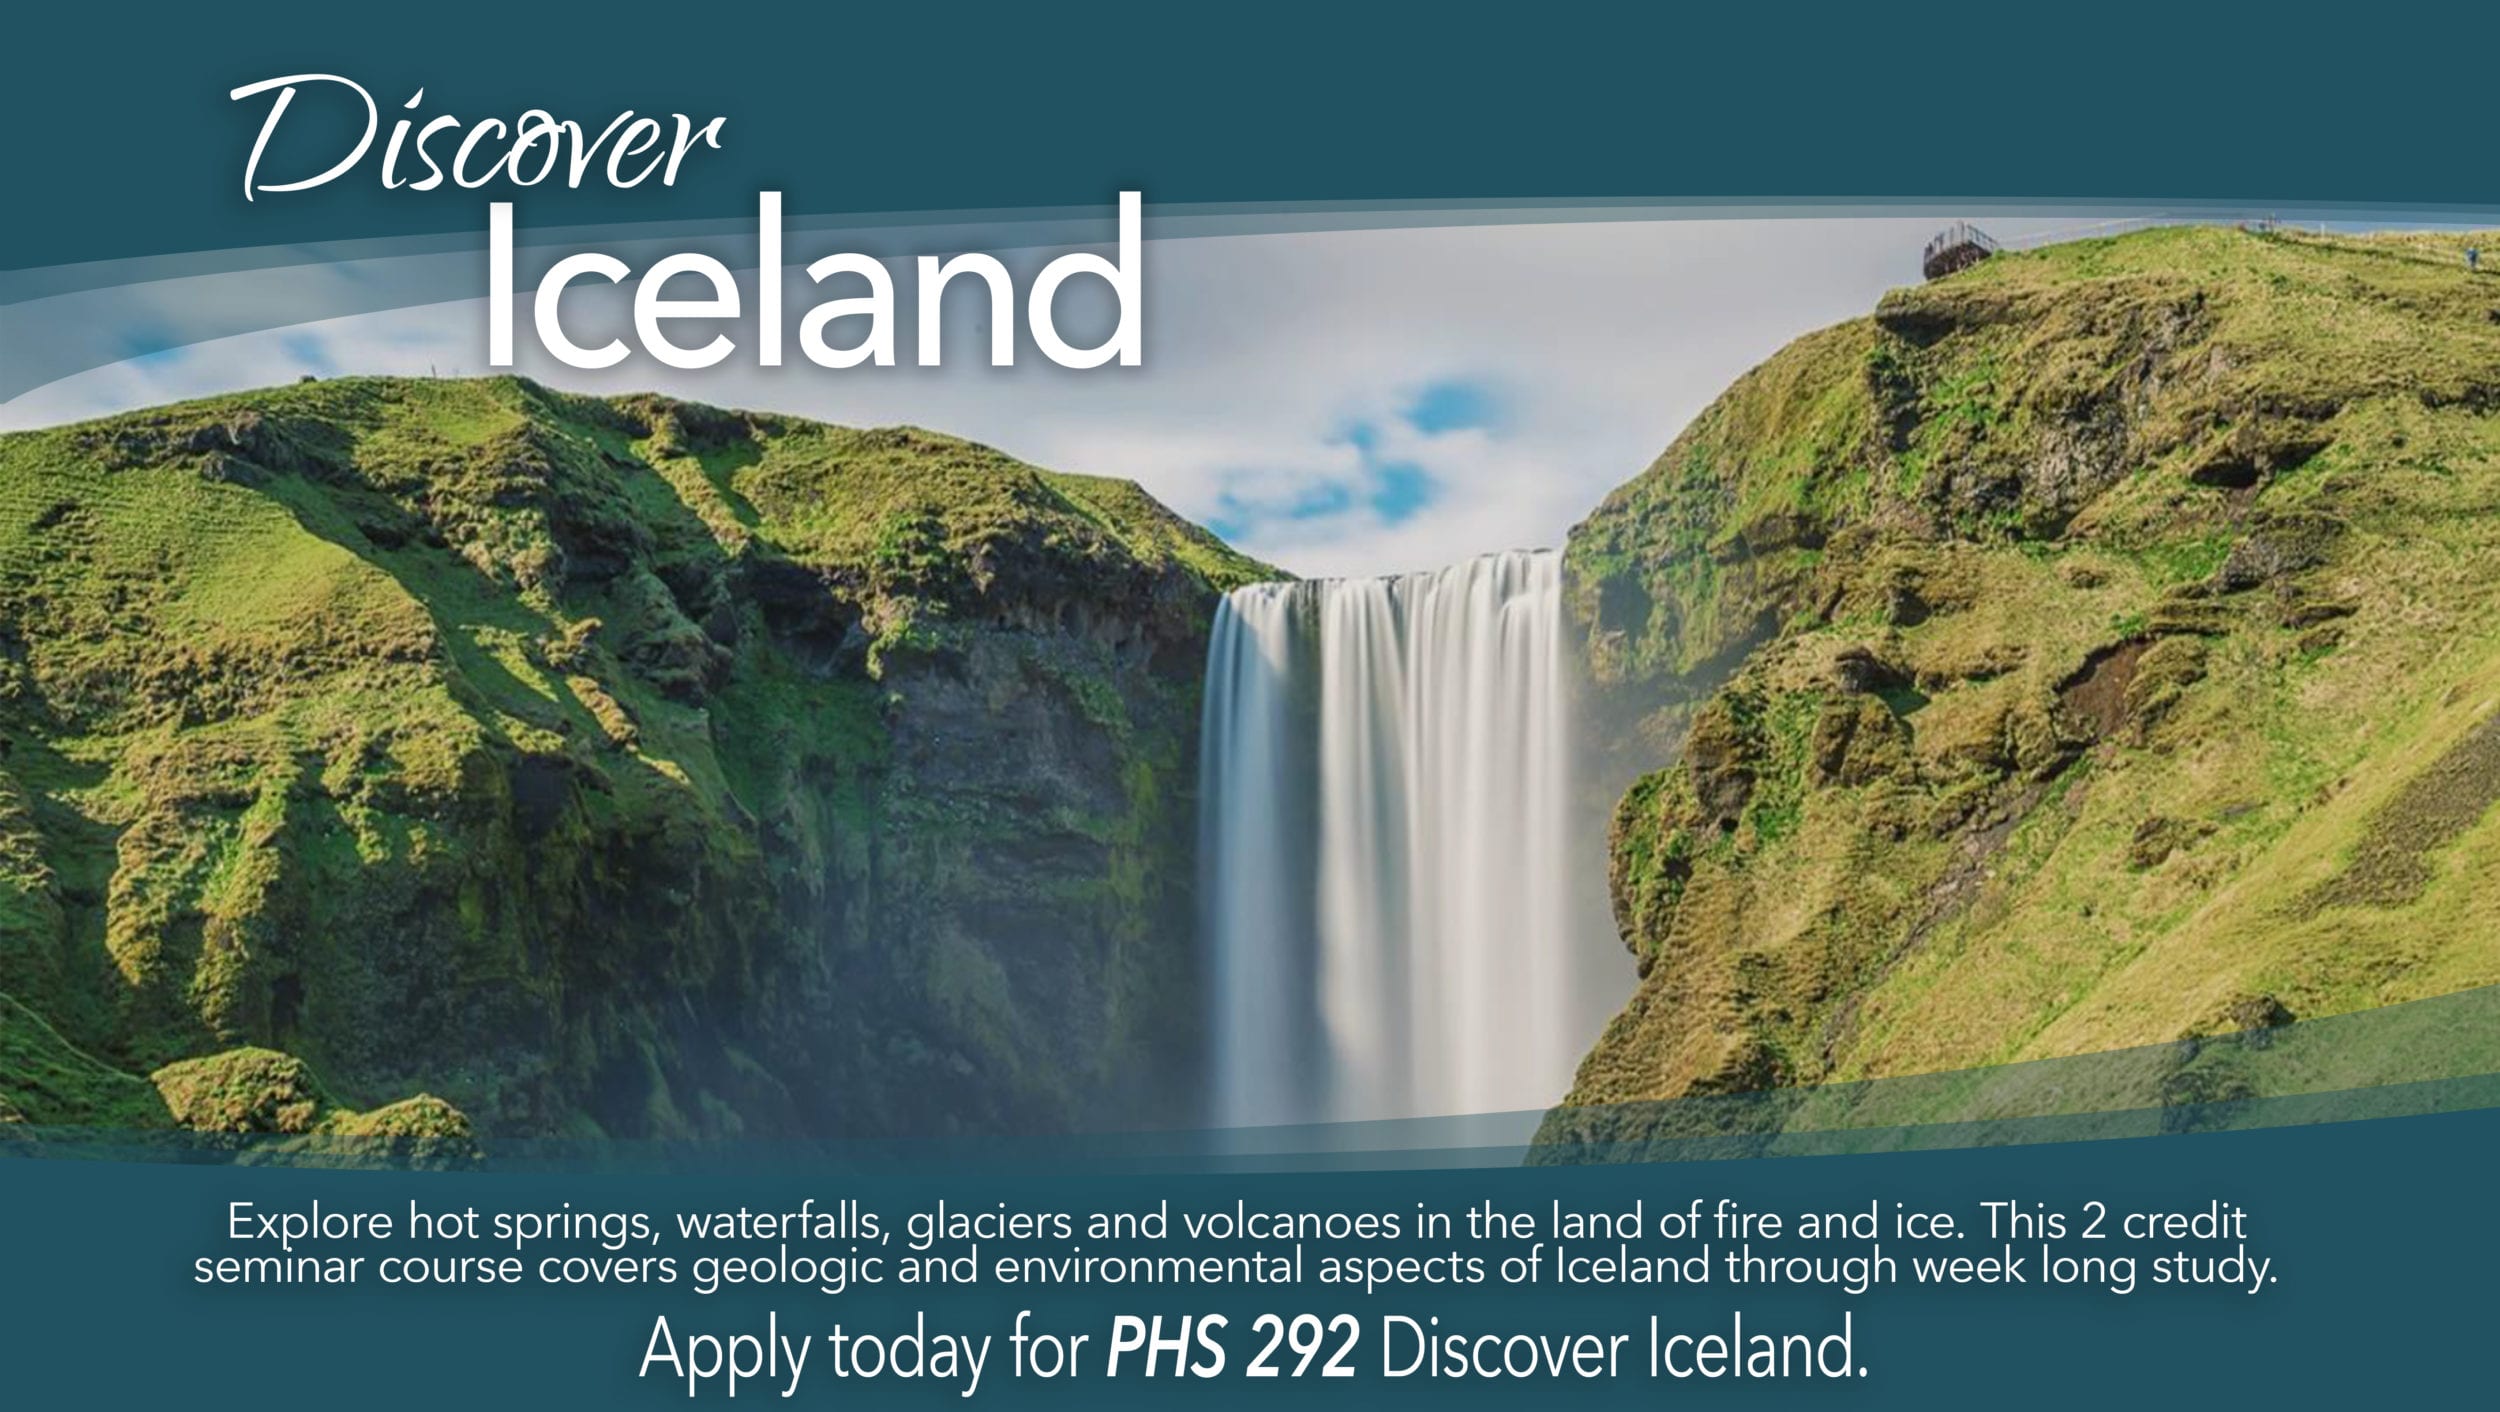 Explore the land of fire and ice this summer in PHS 292: Discover Iceland